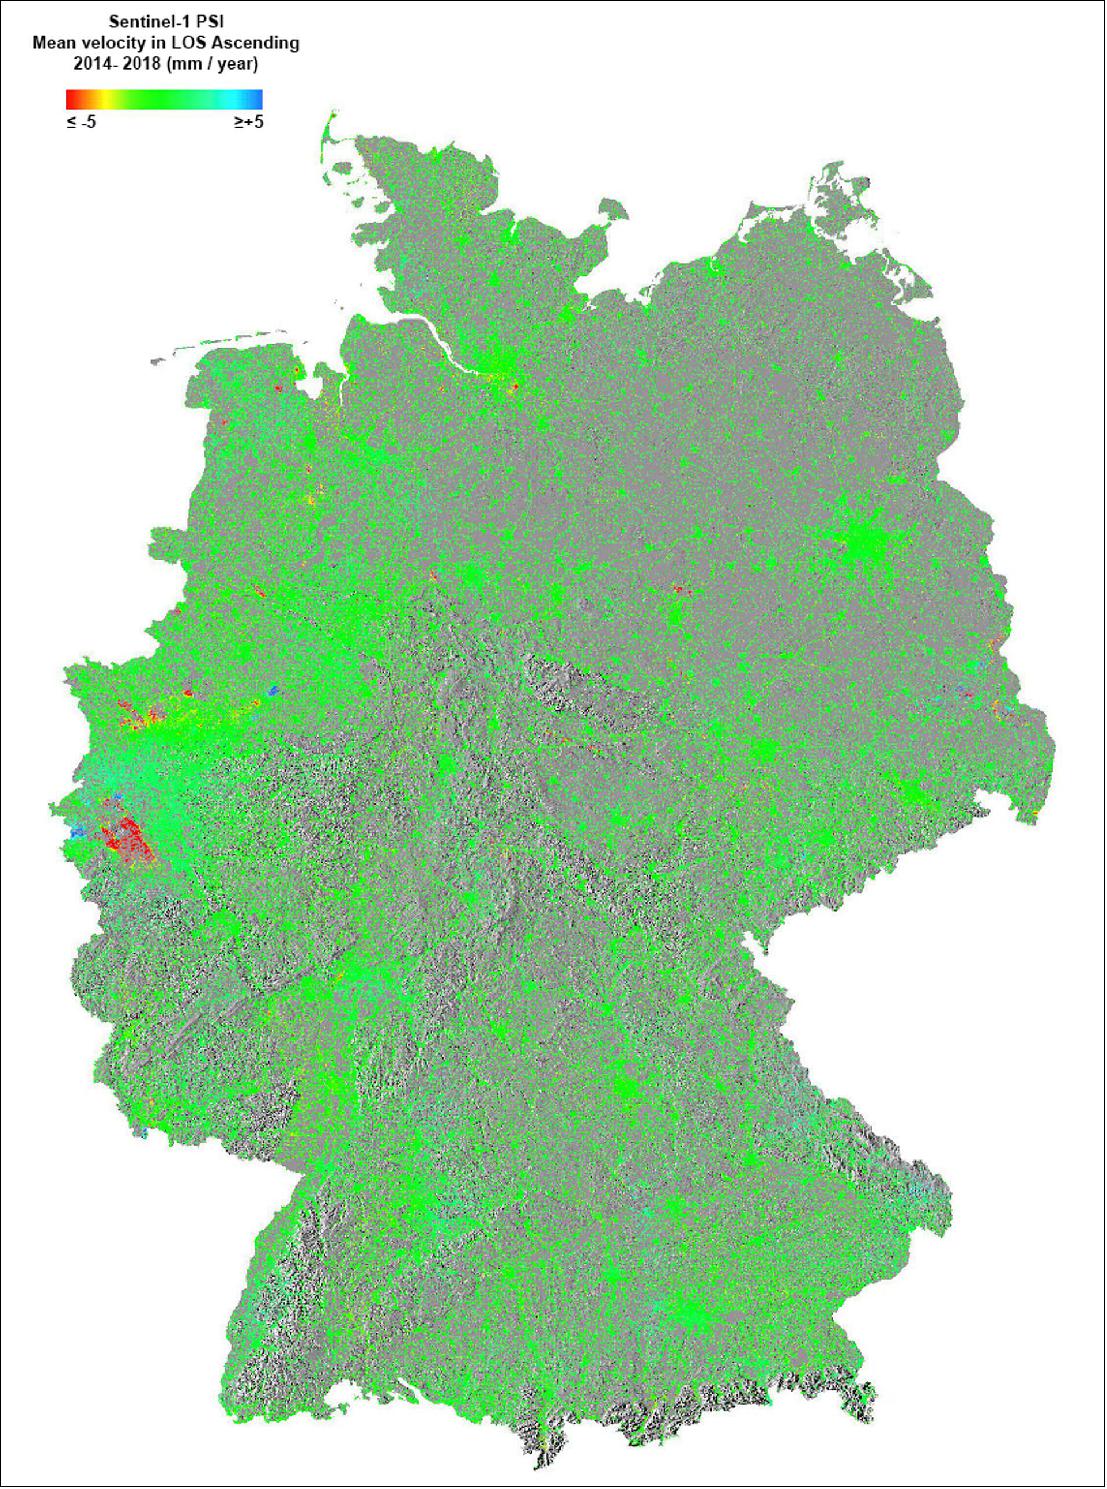 Figure 6: Based on ‘Persistent Scatterer Interferometry’ radar data from the Copernicus Sentinel-1 mission, this is the first nationwide map of ground surface deformation. The map shows how the land surface shifted in millimeters a year between 2014 and 2018. The subsidence shown in red is located in the Rheinisches Braukohlerevier (lignite region in the bight of Cologne) in the west of the country due to open pit lignite mining accompanied by groundwater lowering. Blue patches in the adjacent area are likely to be related to the rise of groundwater after mining activities ceased (image credit: ESA, the image contains modified Copernicus Sentinel data (2014–18), processed by BGR)